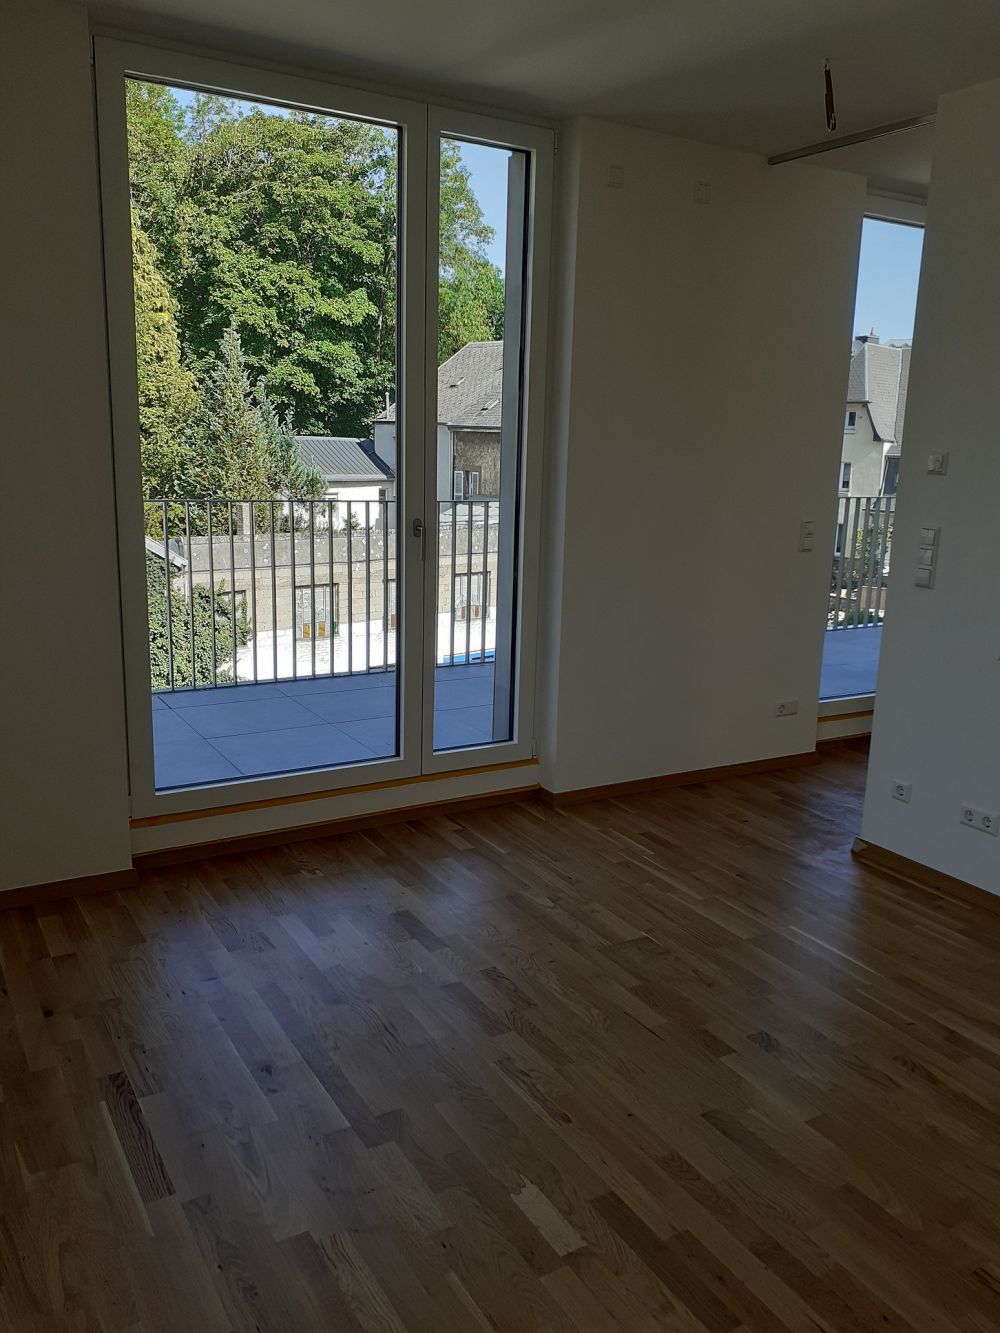 Luxembourg-centre-ville - To rent : apartment